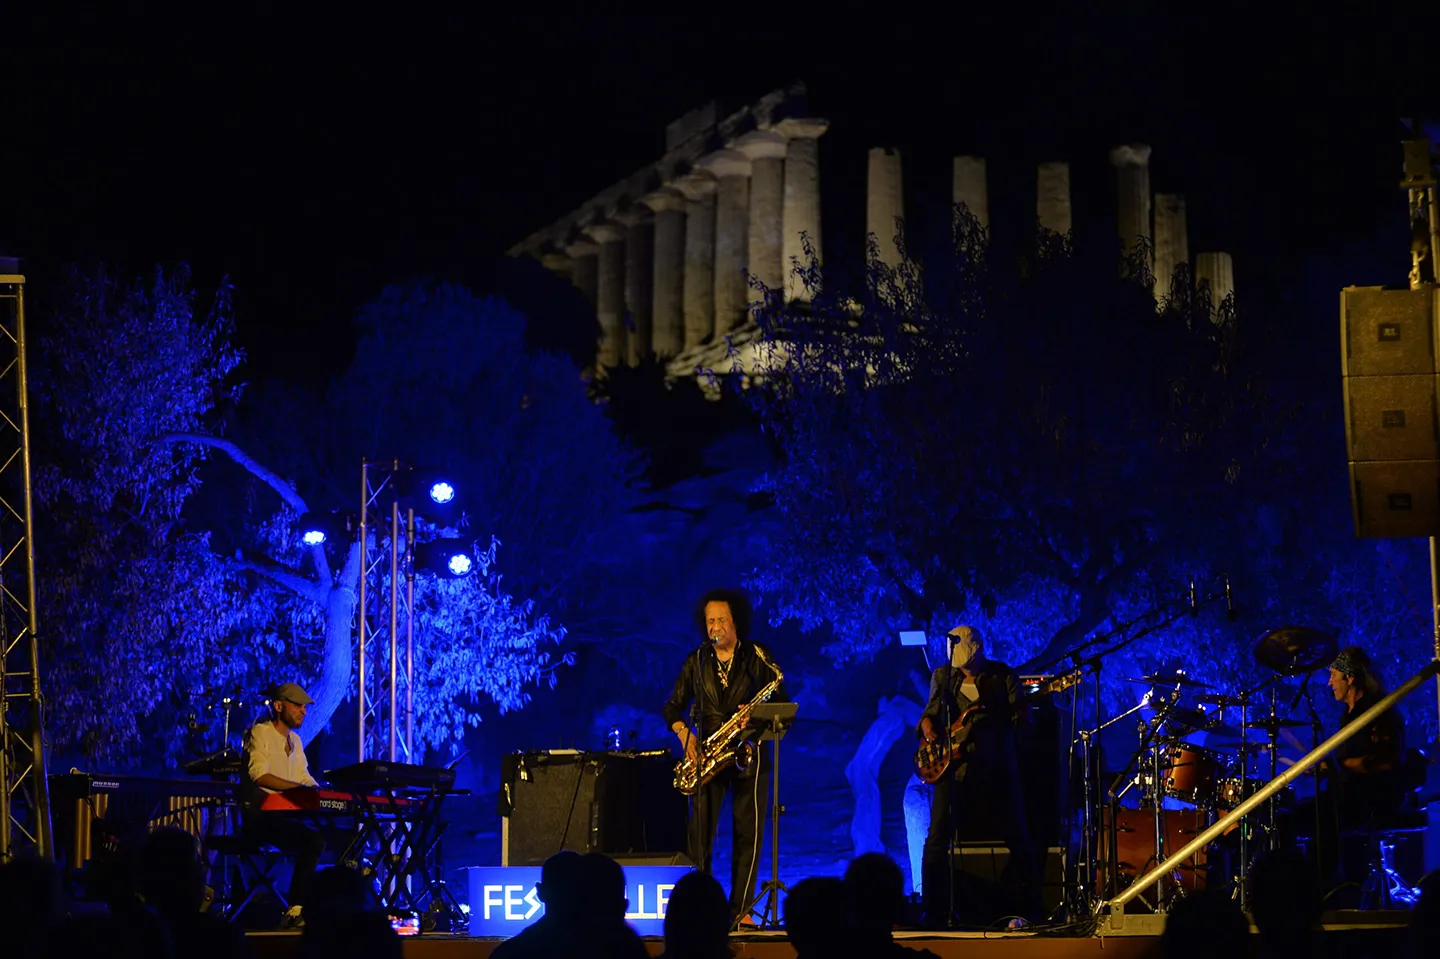 festivalle, agrigento, sicily, band playing, stage